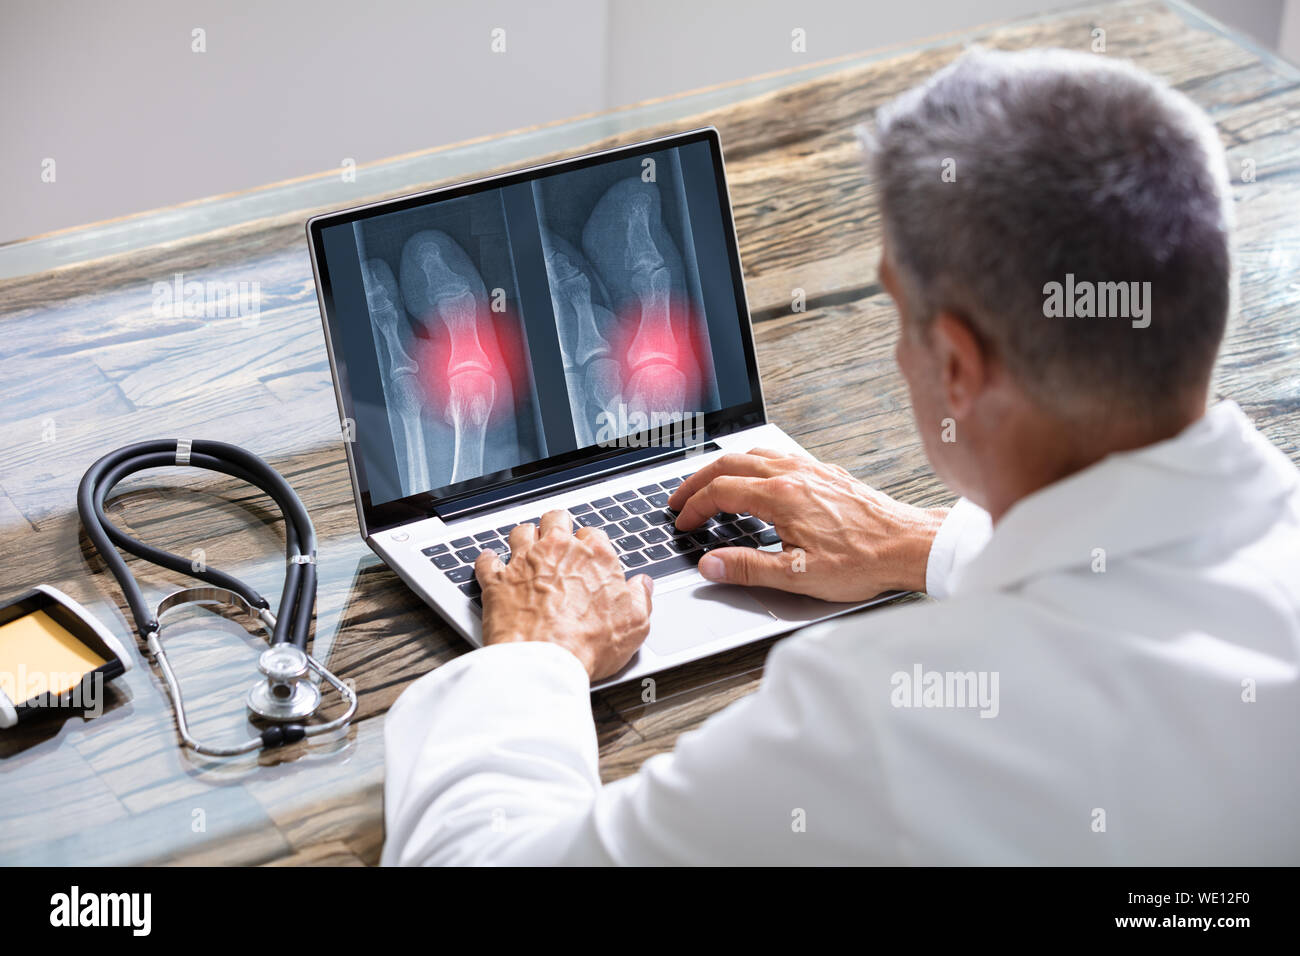 Doctor Looking At Foot X-ray On Laptop With Stethoscope Stock Photo